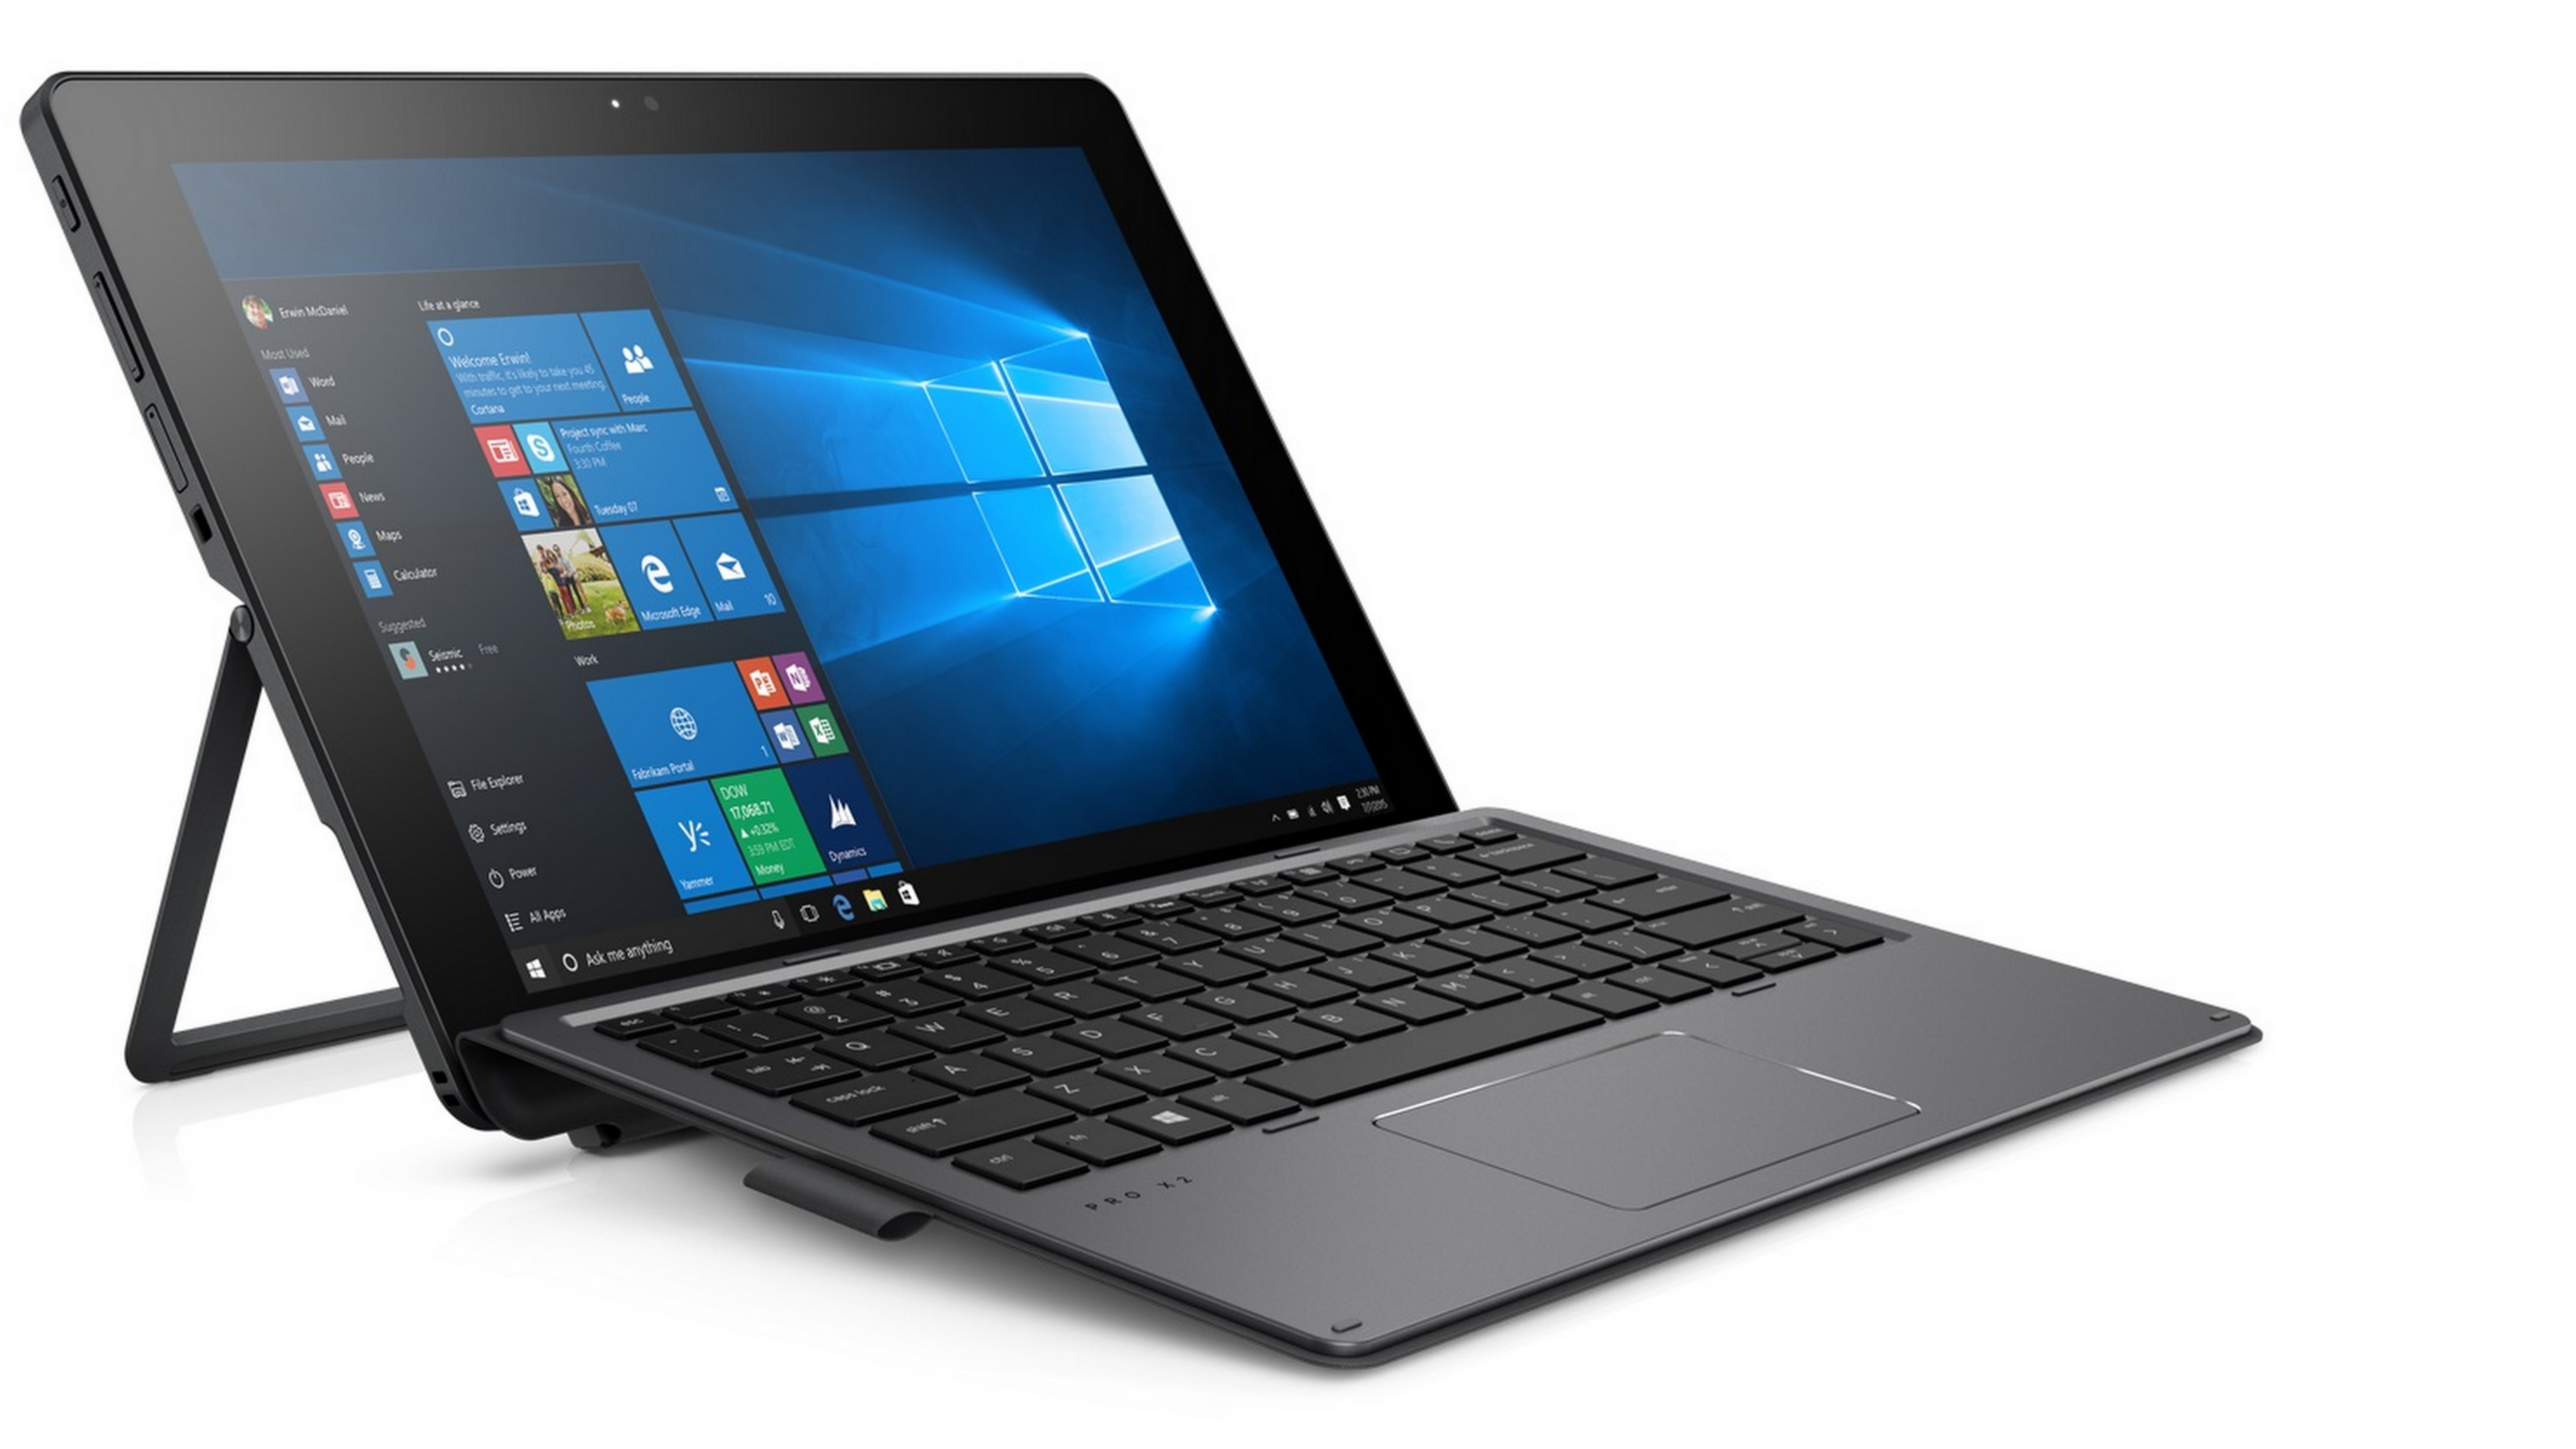 Mobile World Congress 2017: HP debuts 2-in-1 device with Windows 10